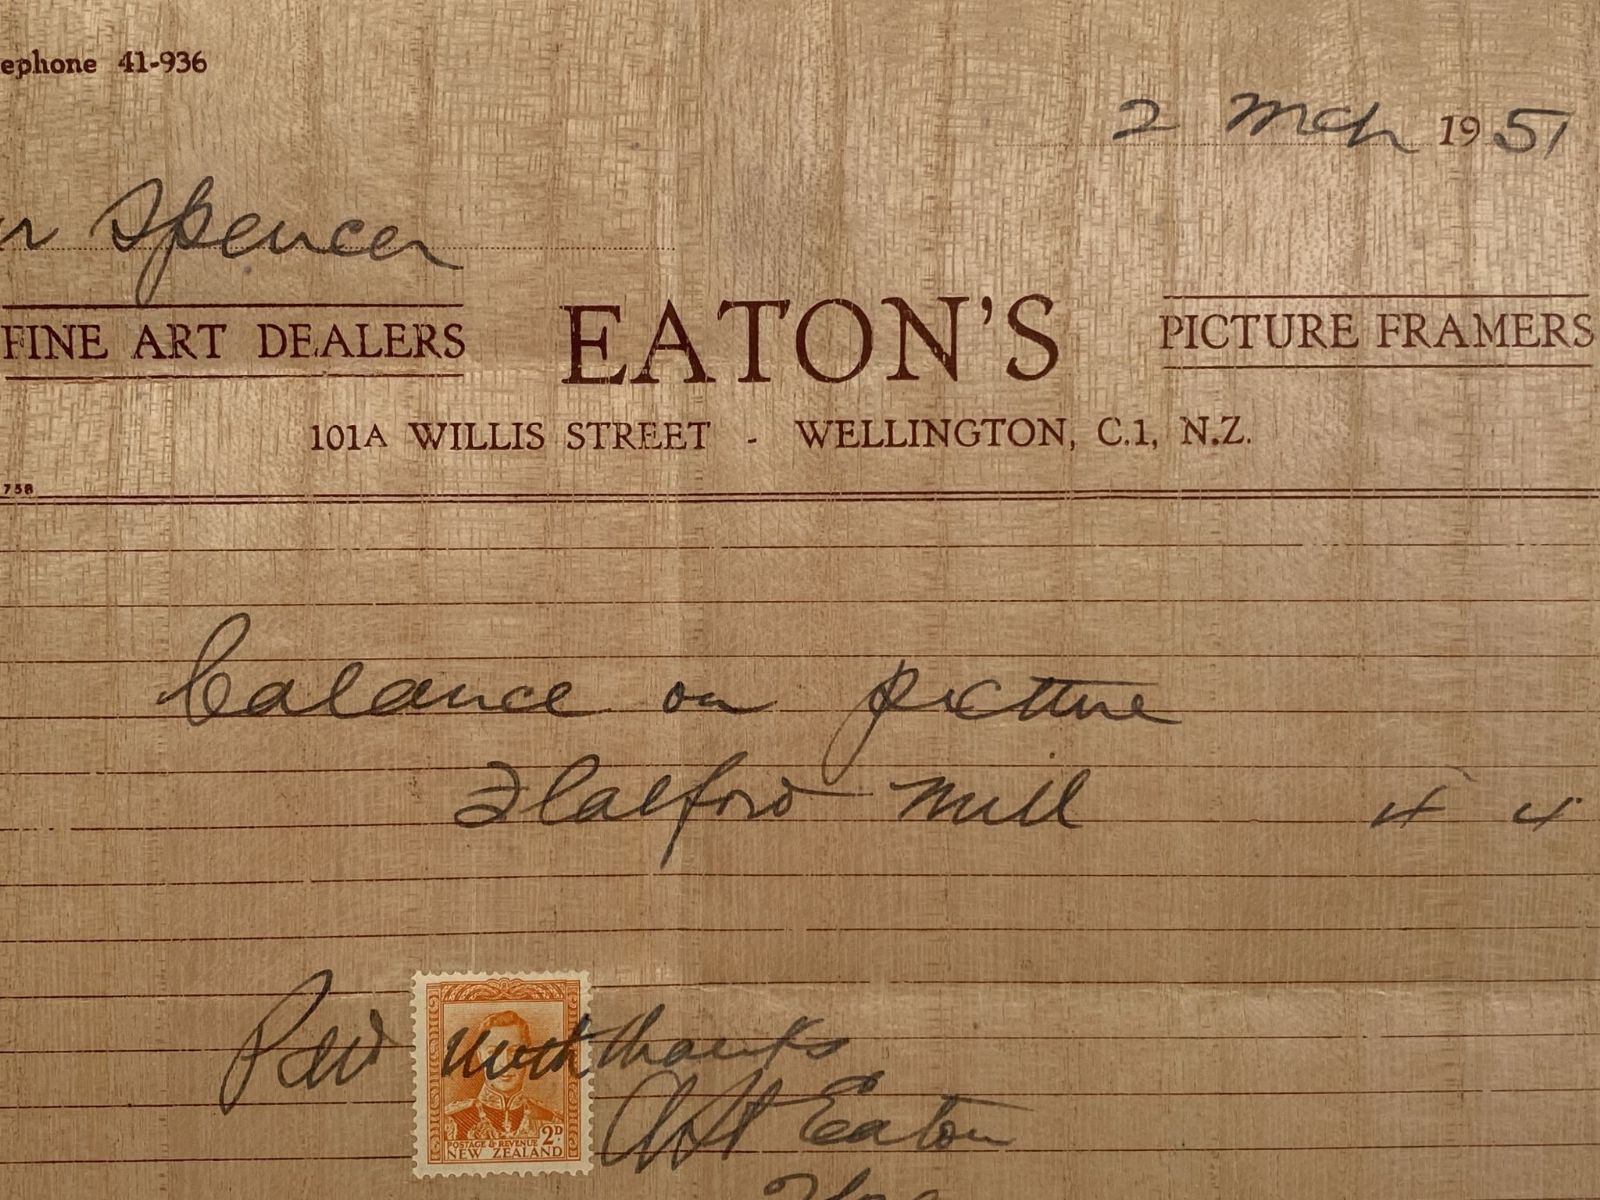 OLD INVOICE / RECEIPT: Eaton's Fine Art Dealers / Picture Framers 1957